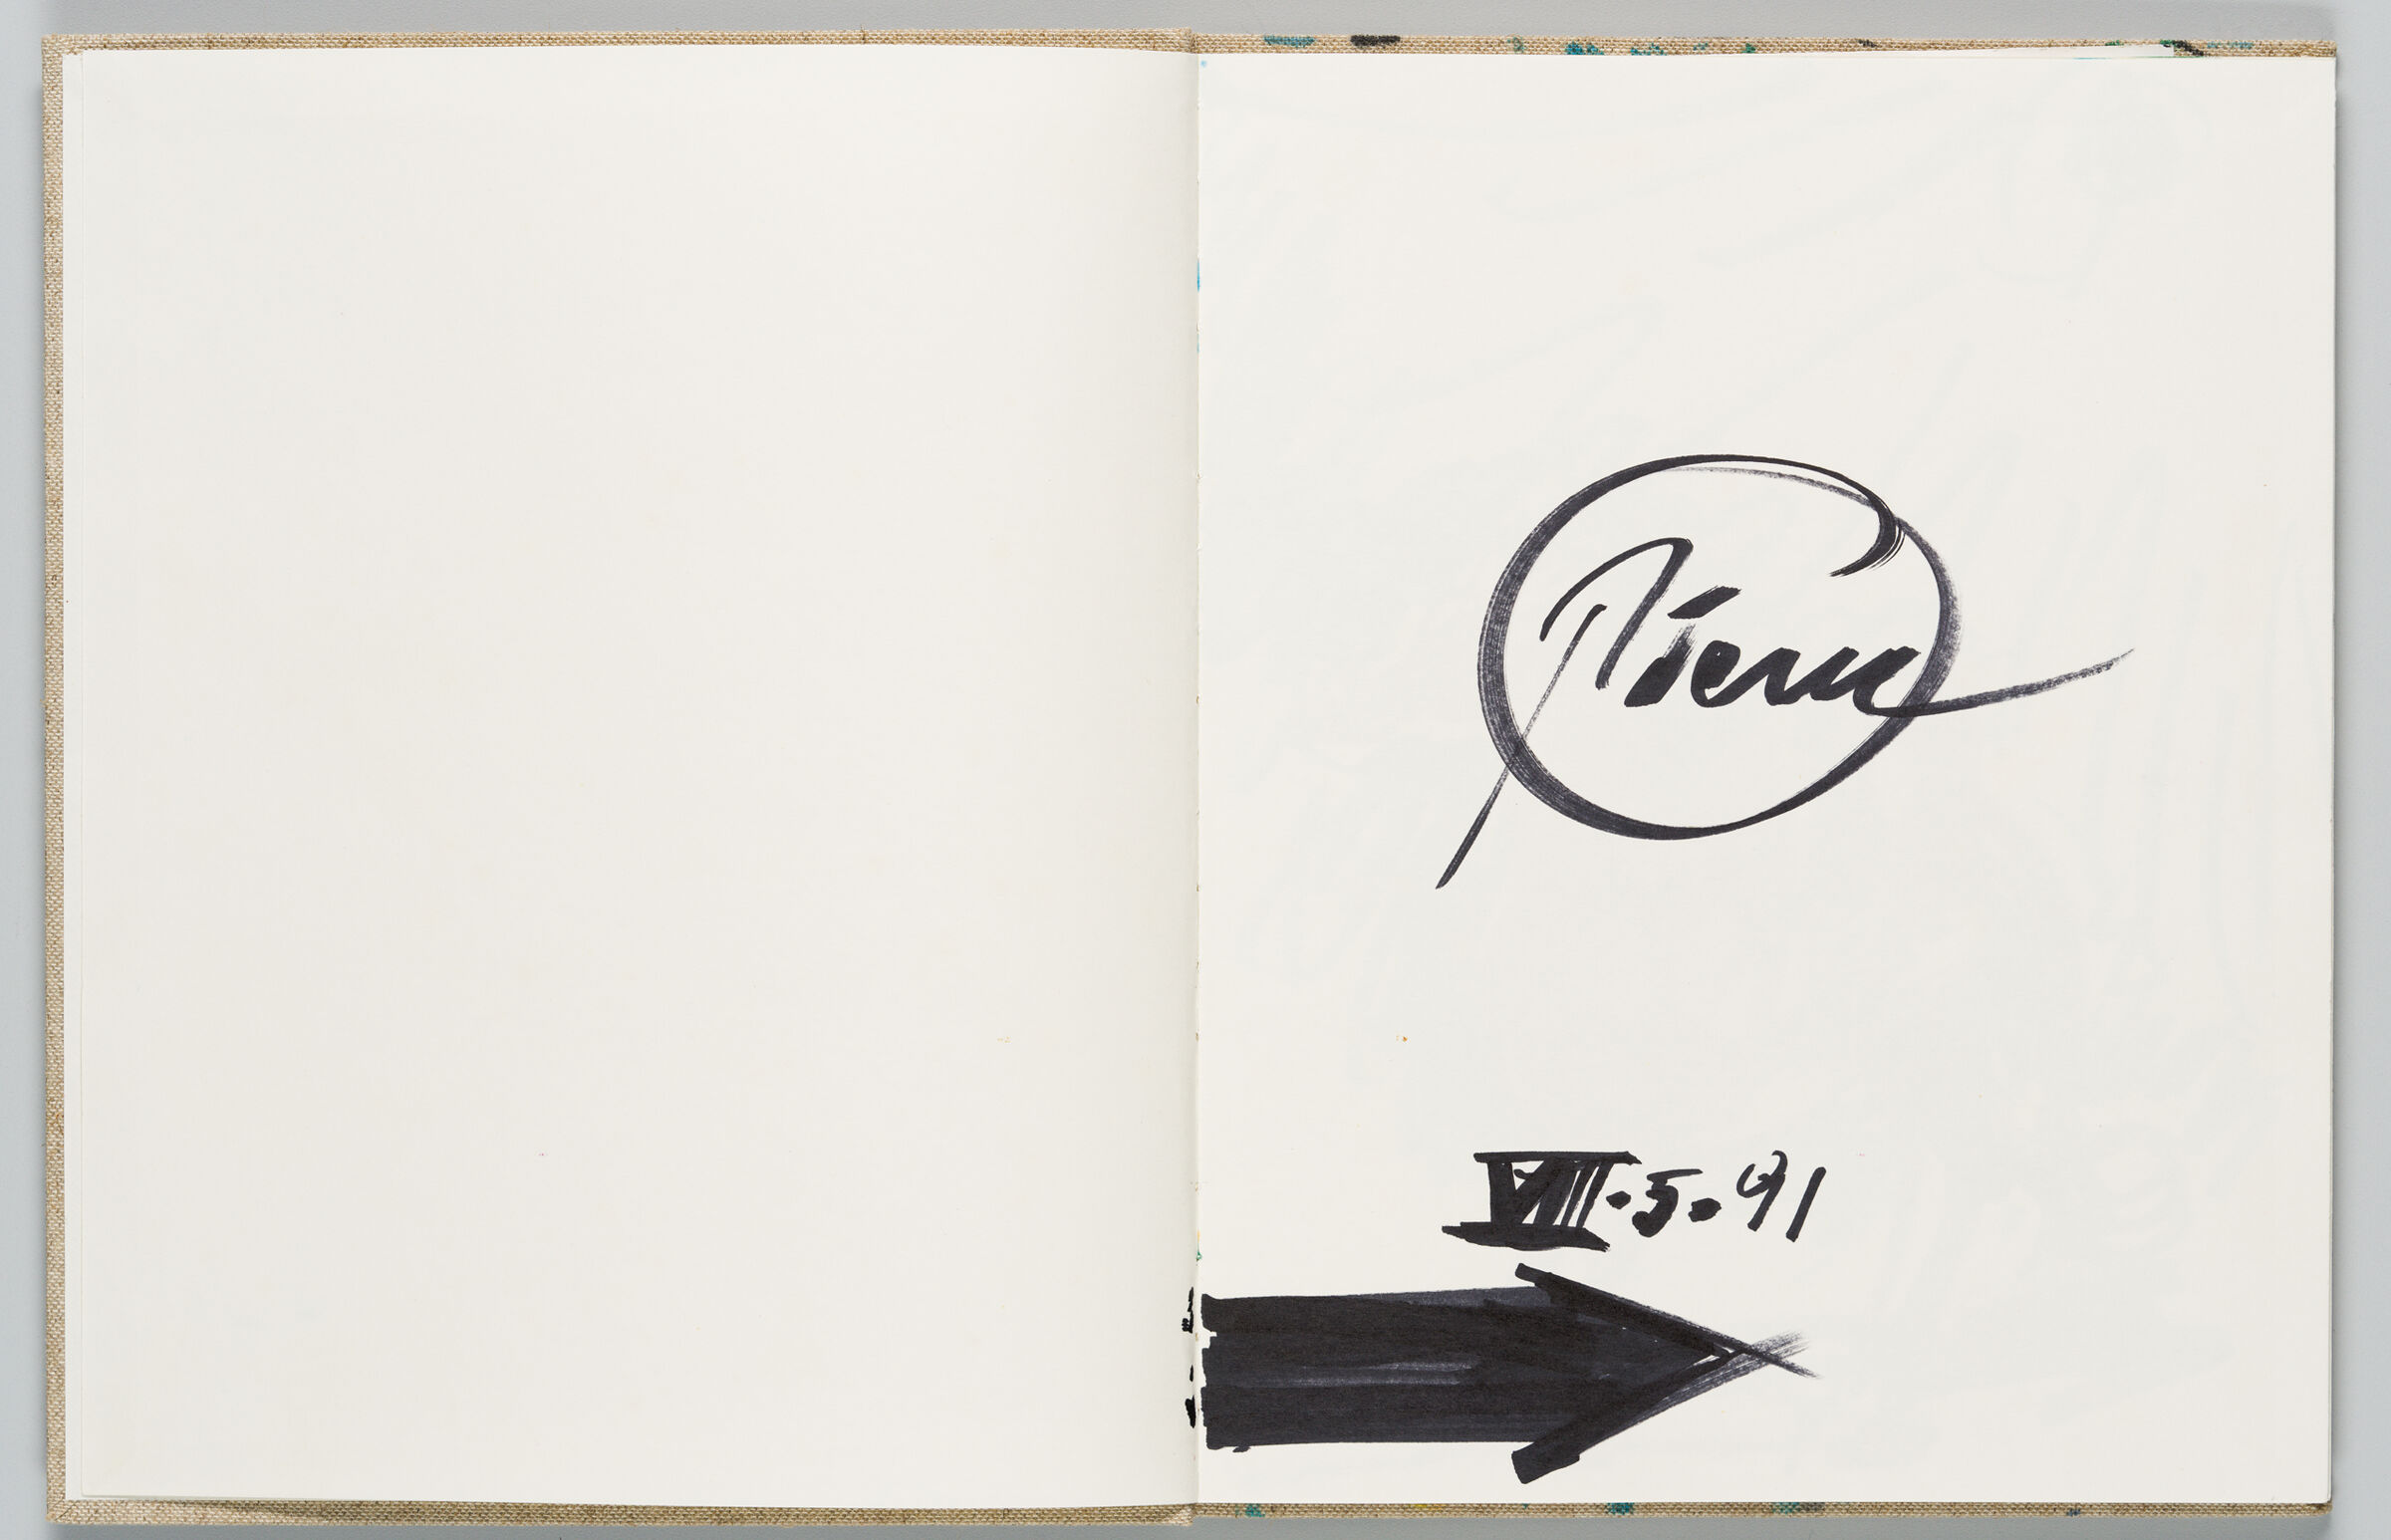 Untitled (Blank, Left Page); Untitled (Signature, Right Page)